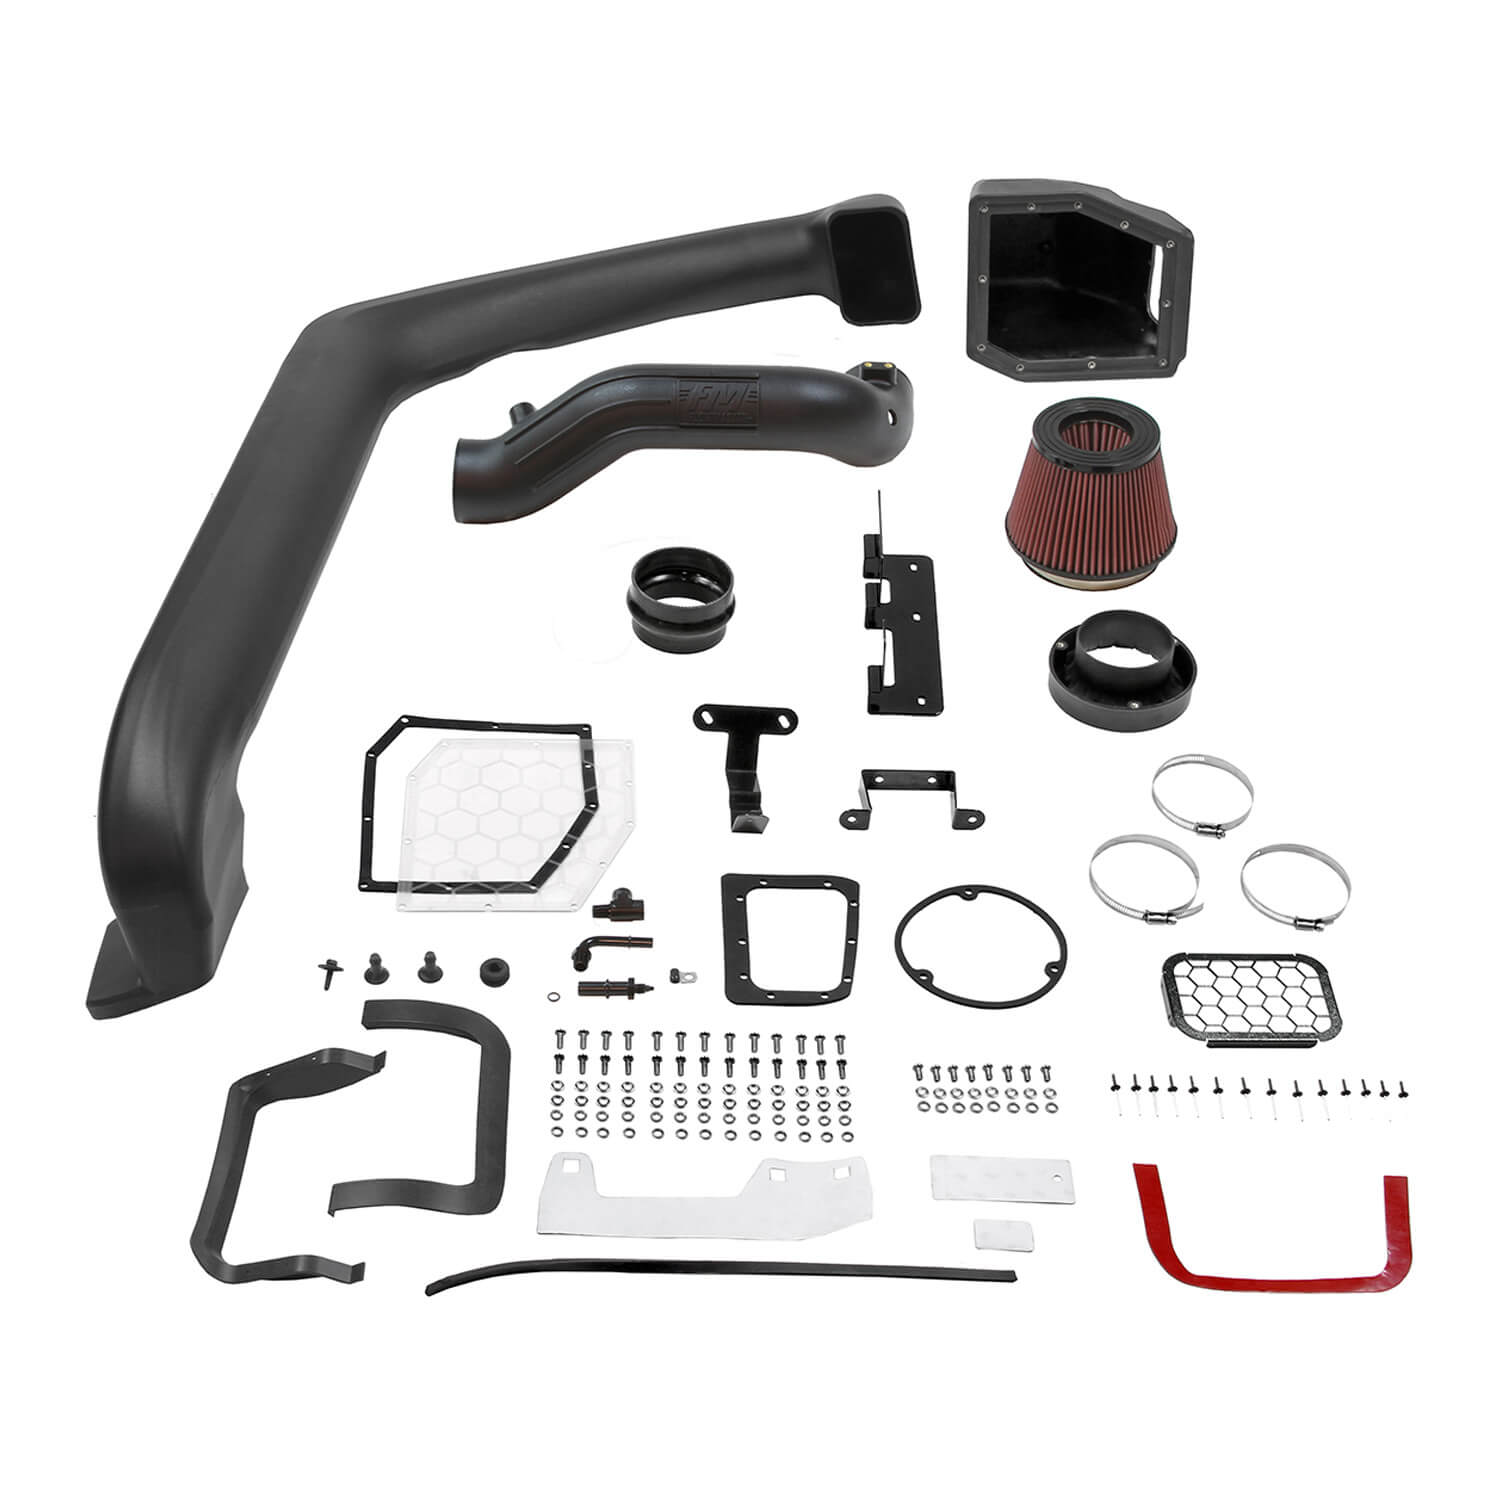 '18-23 Jeep JL Delta Force Performance Air Intake Performance Flowmaster parts